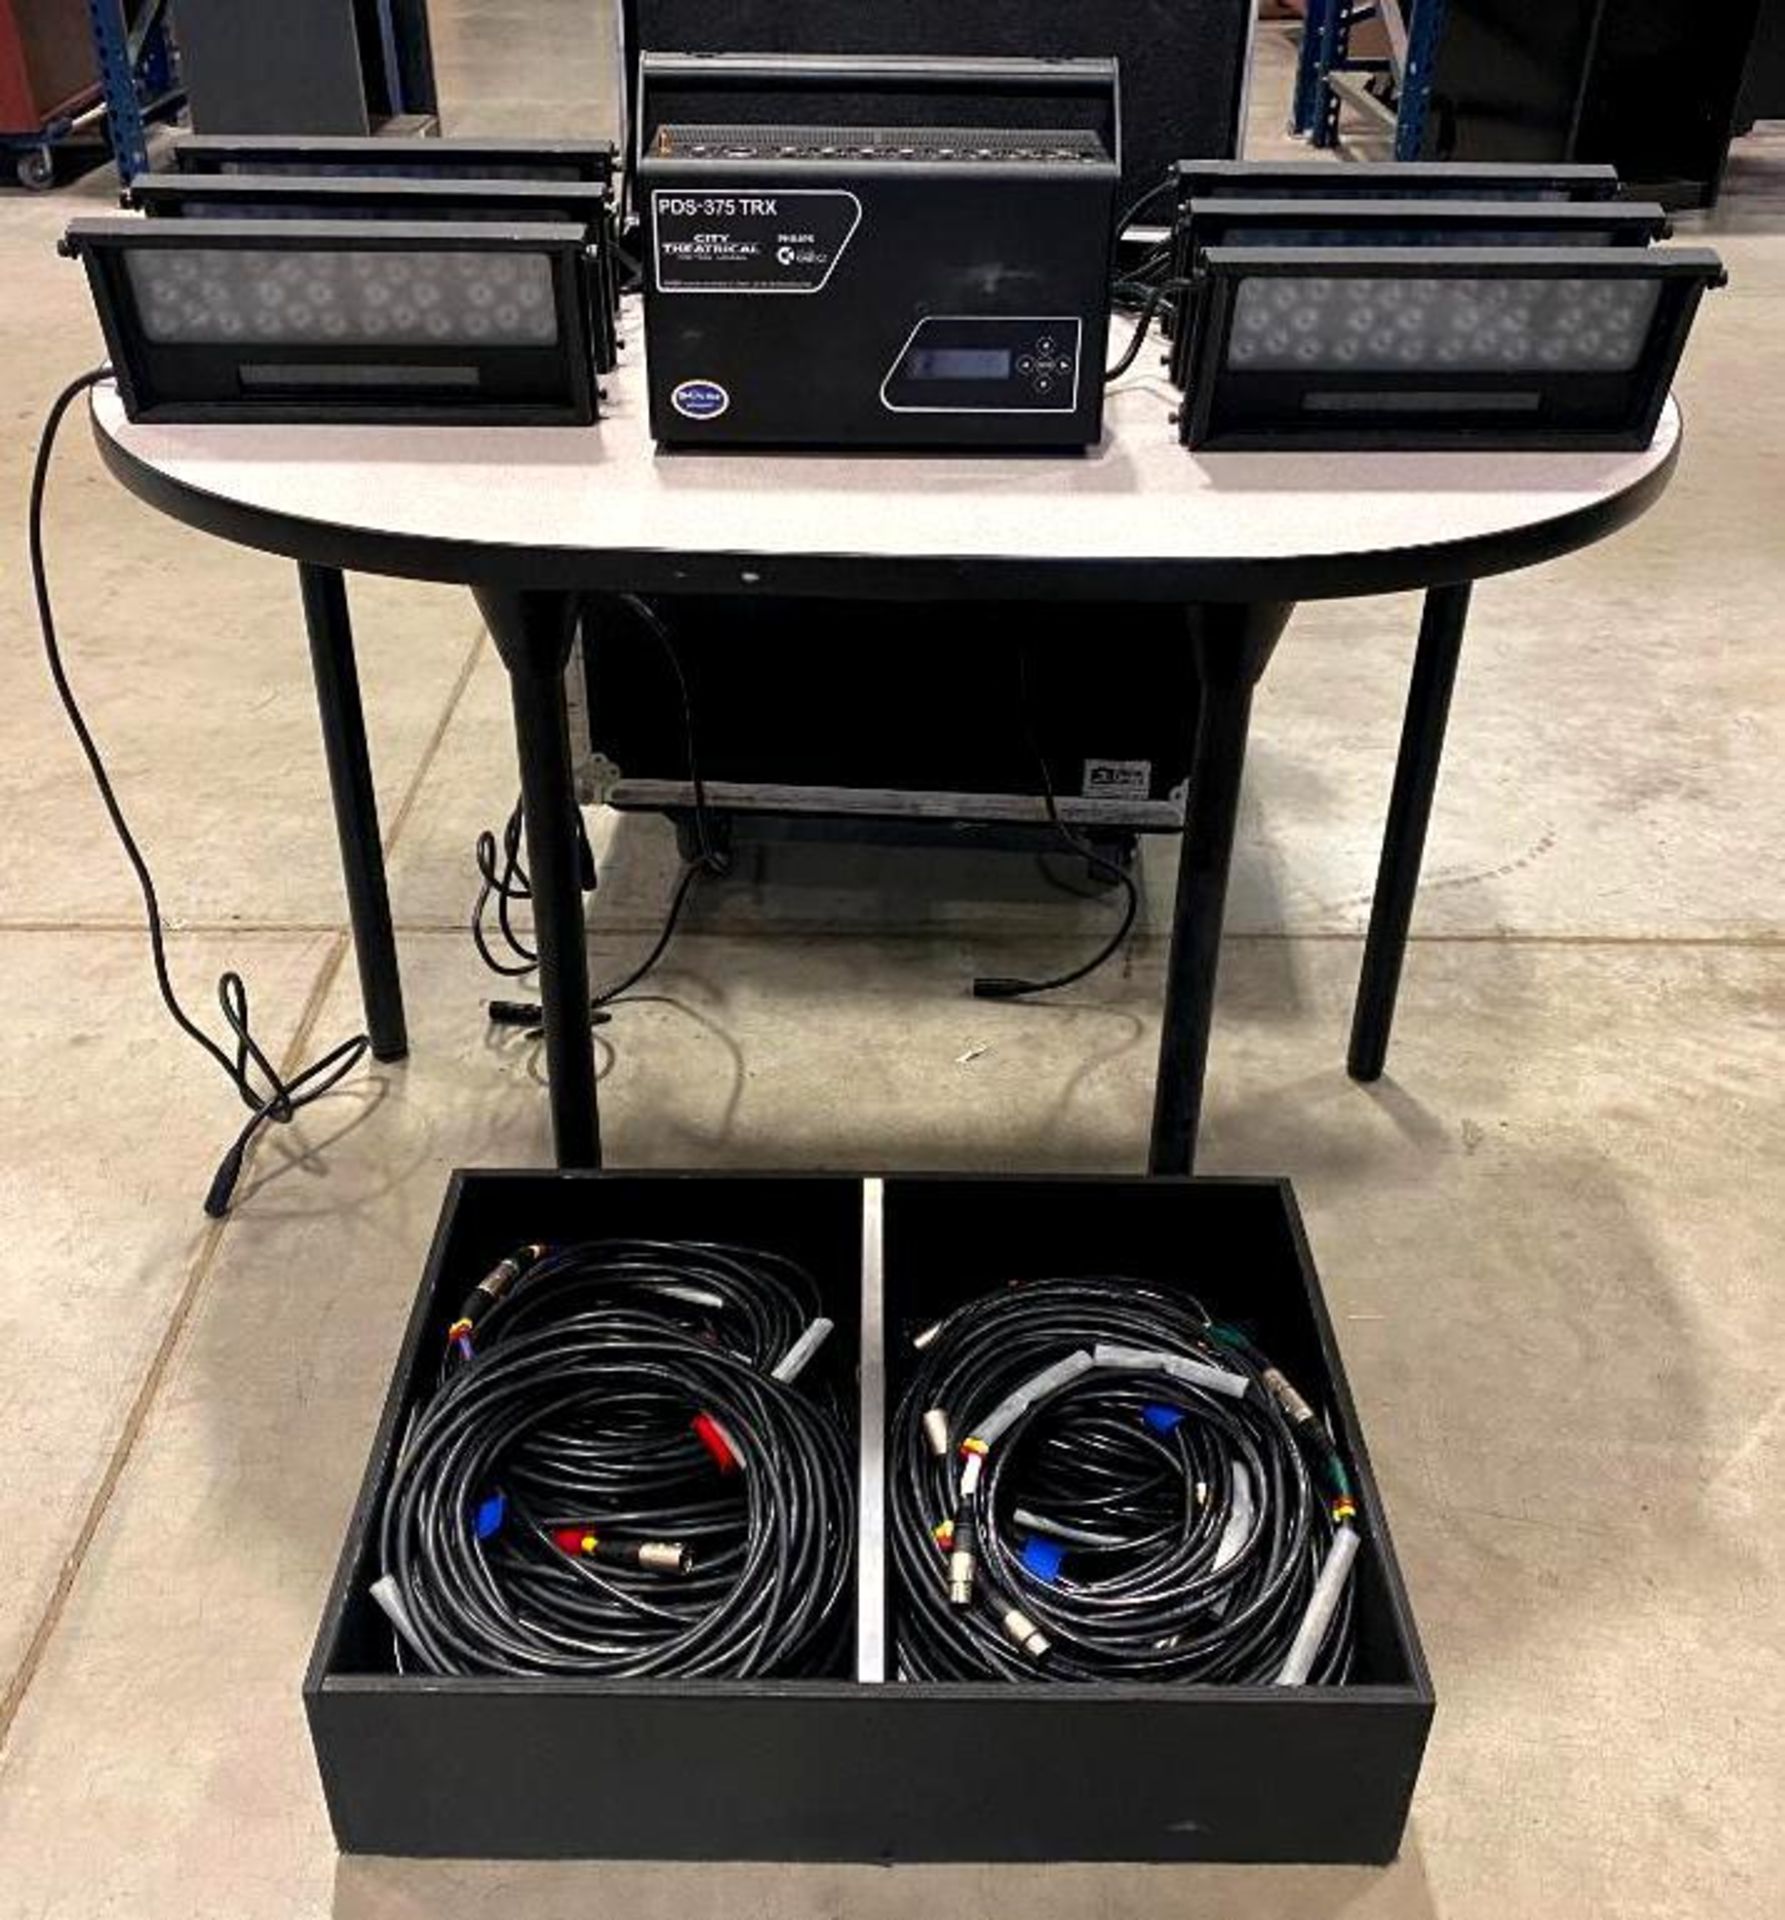 DESCRIPTION CITY THEATRICAL COLOR KINETICS WITH (6) LIGHTS AND CORDS AND ROAD CASE ON CASTERS BRAND/